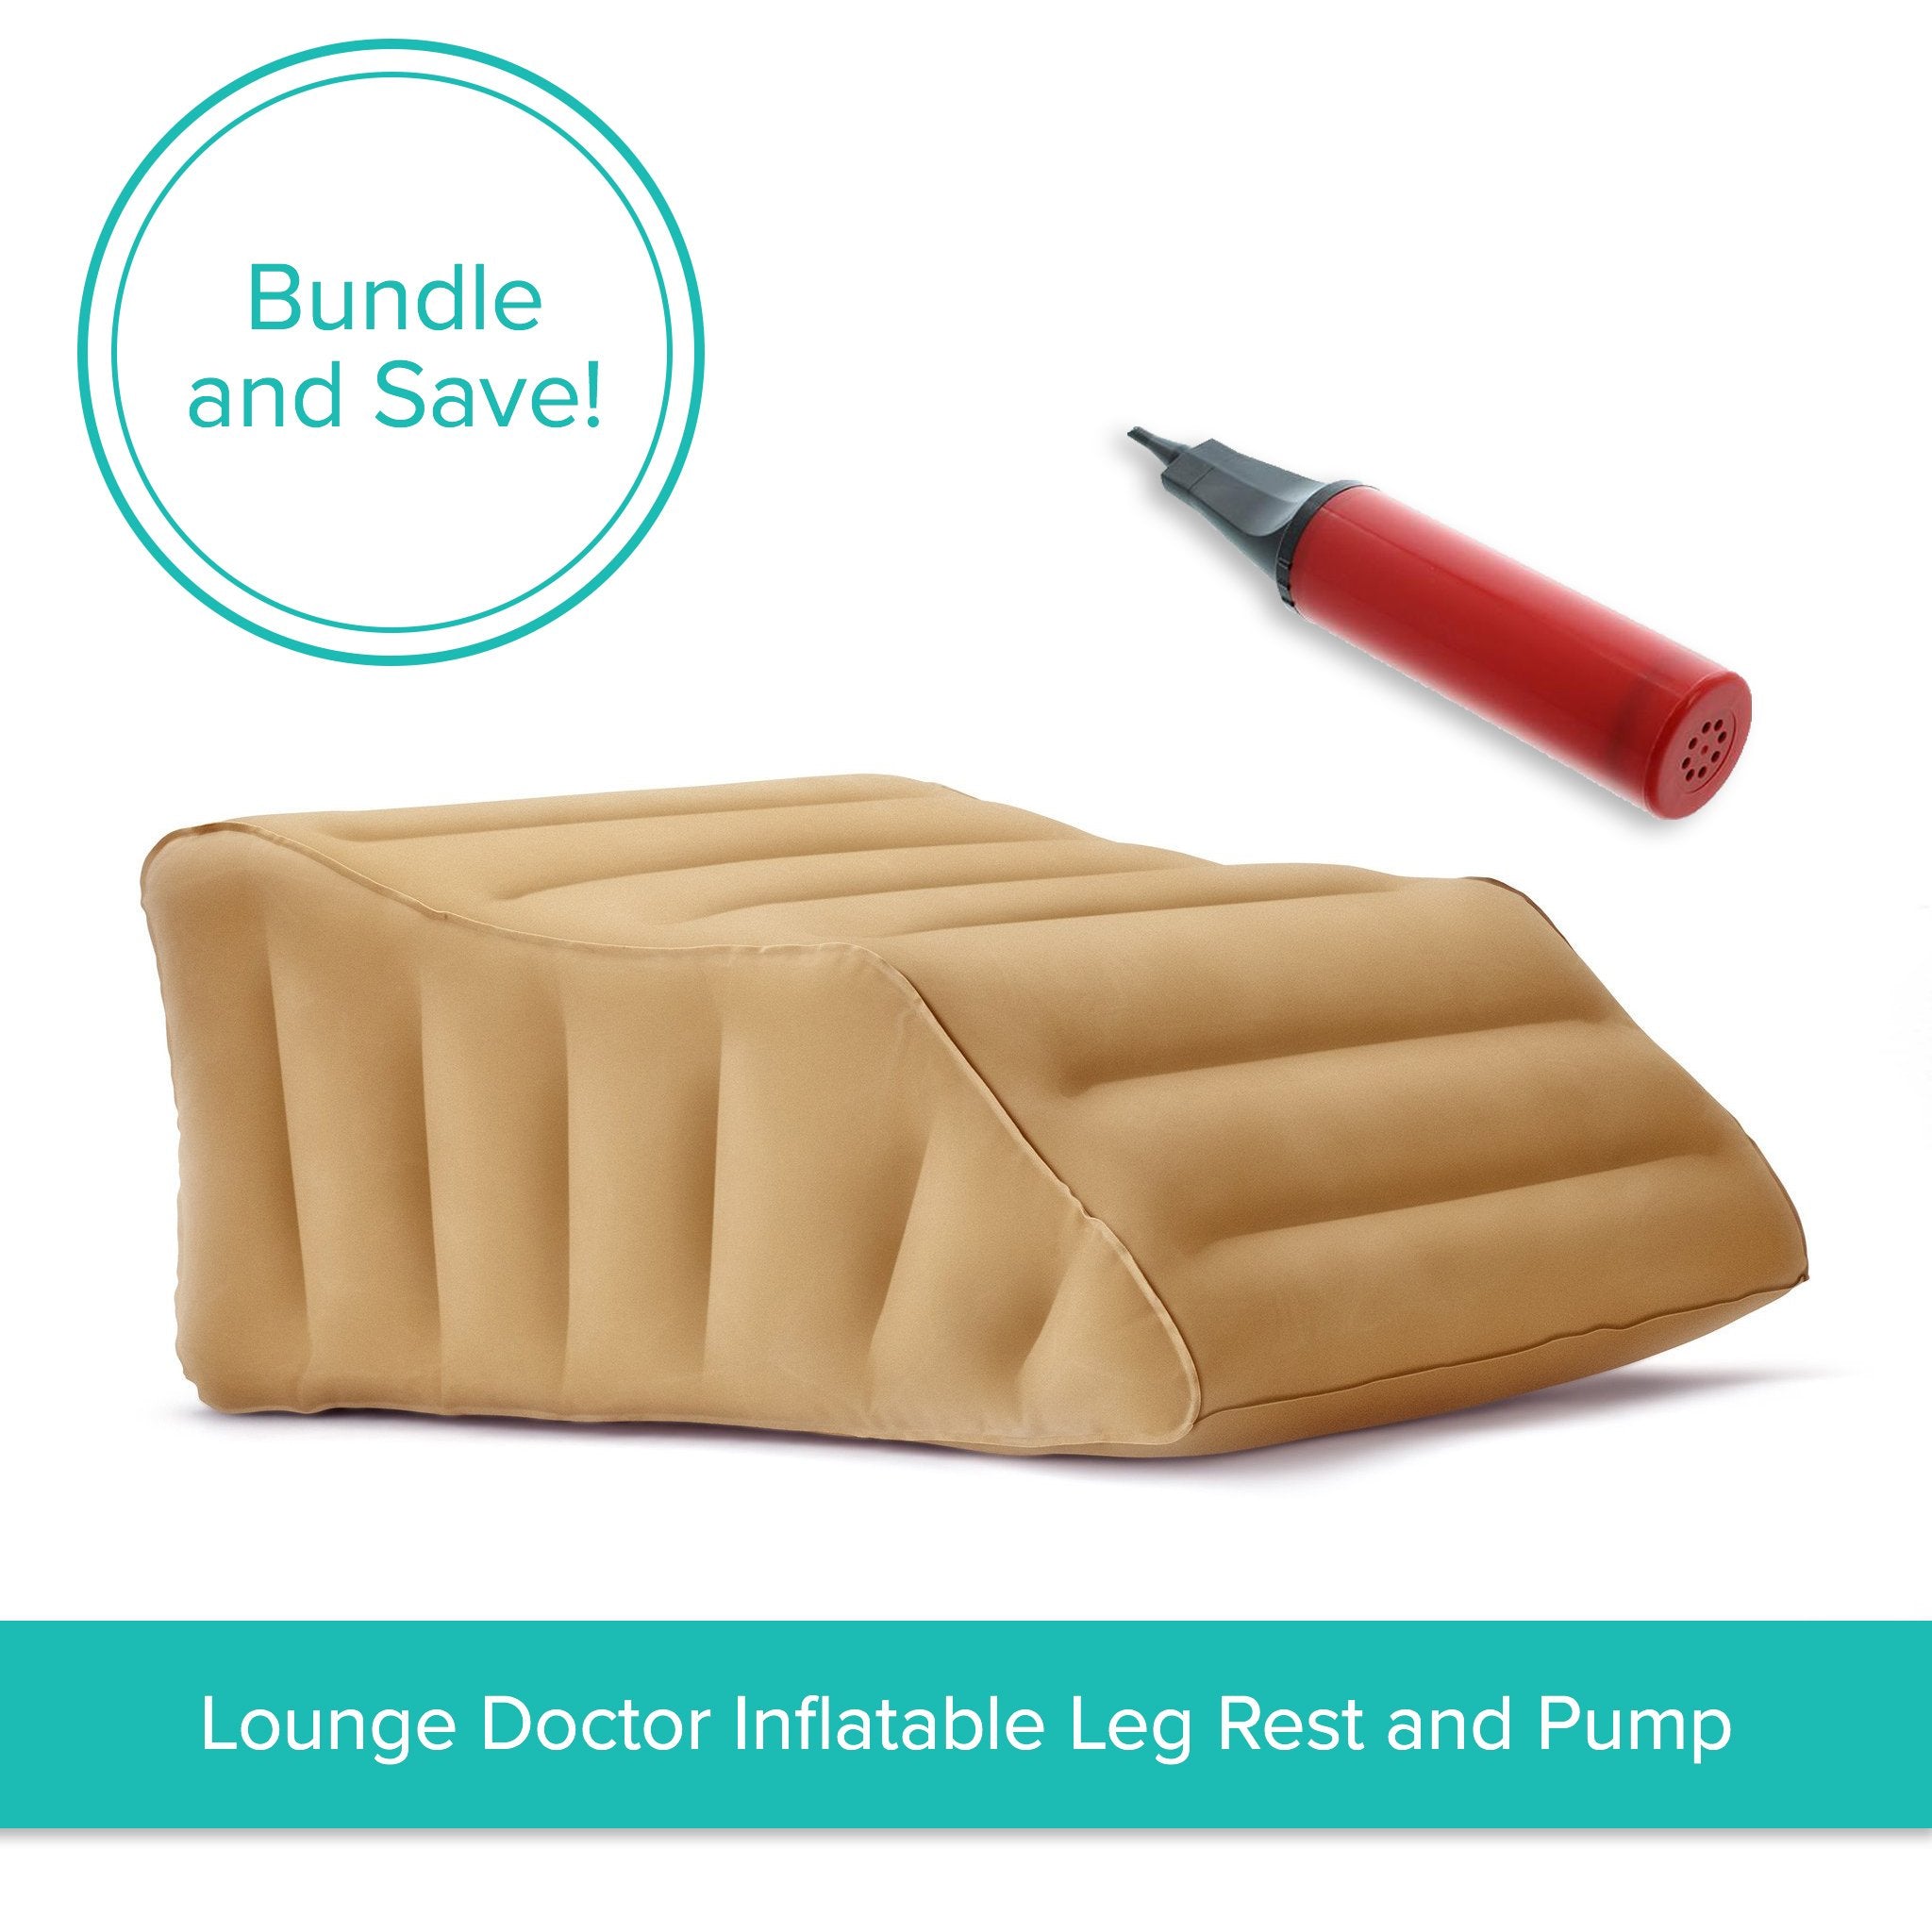 Lounge Doctor Leg Rest Turquoise Tall : Target